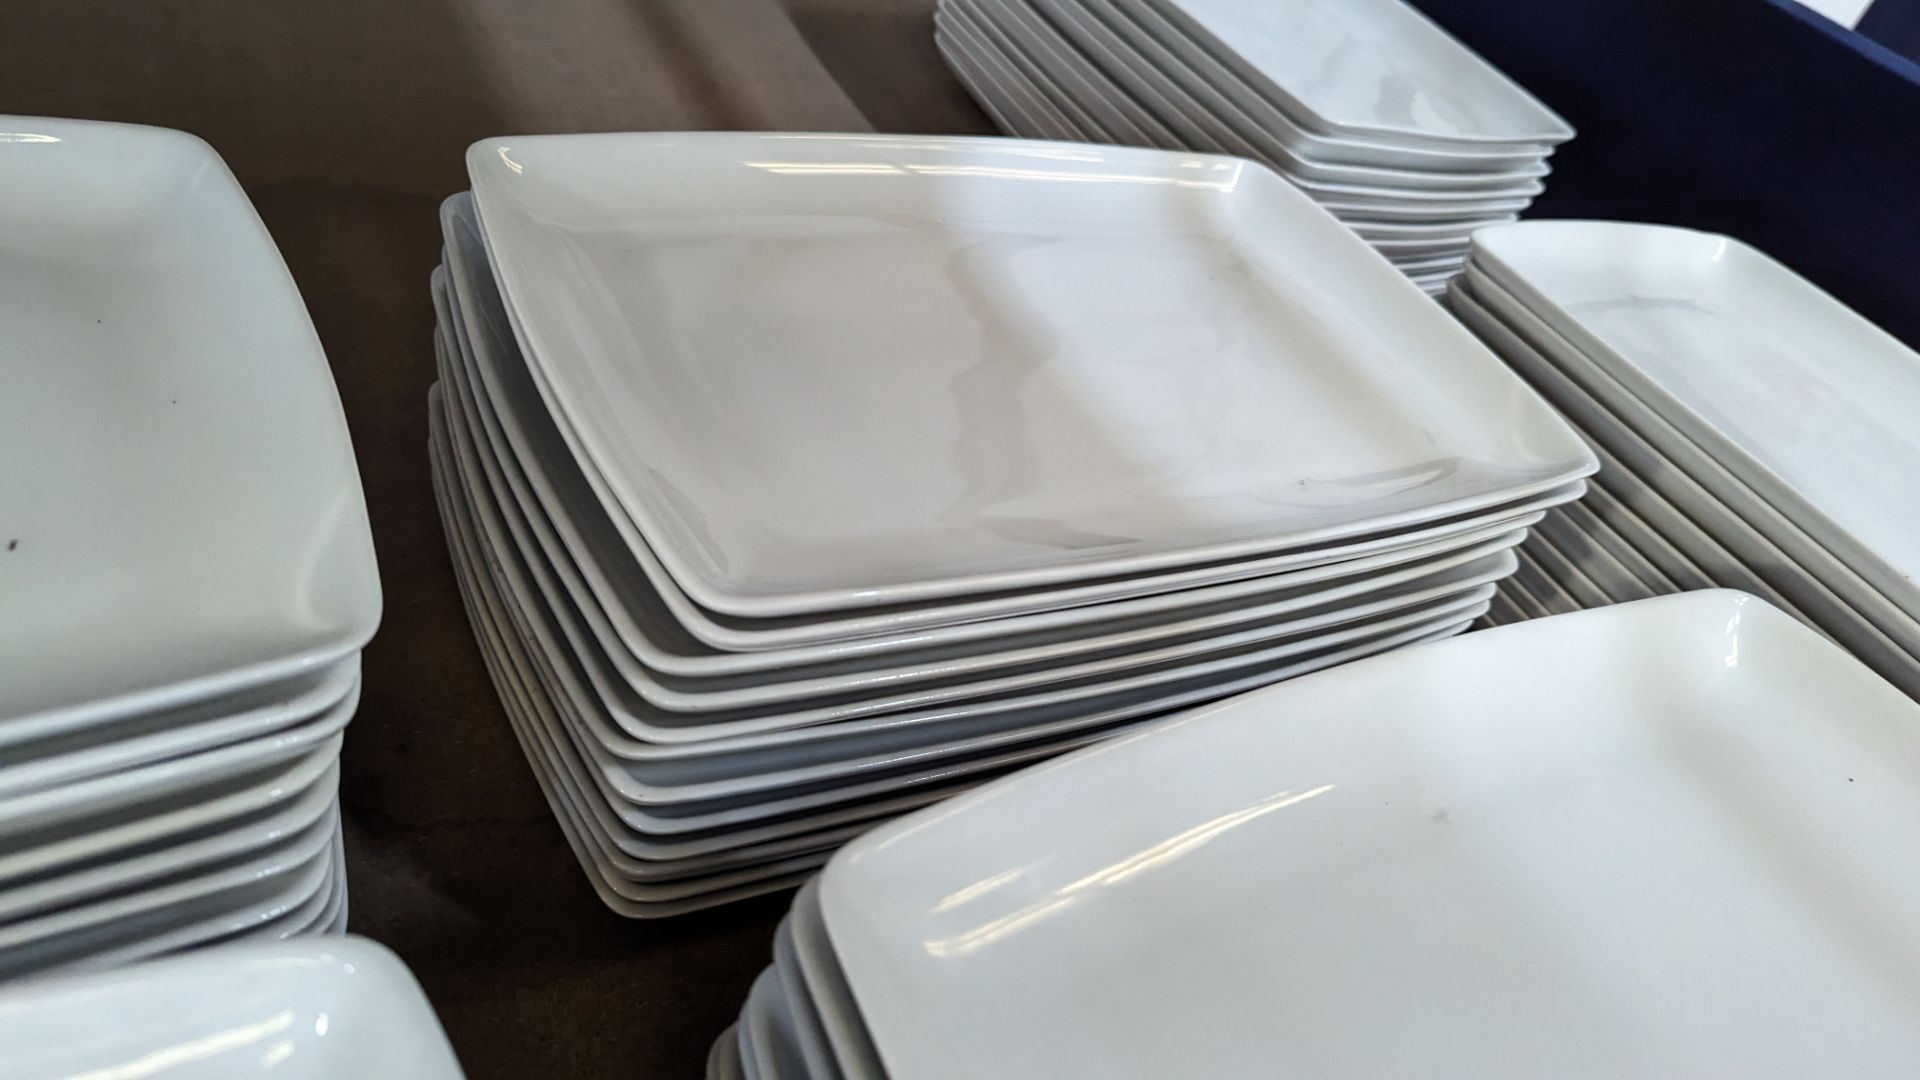 36 off white rectangular plates/small platters each measuring approximately 325mm x 210mm - 3 stacks - Image 5 of 6